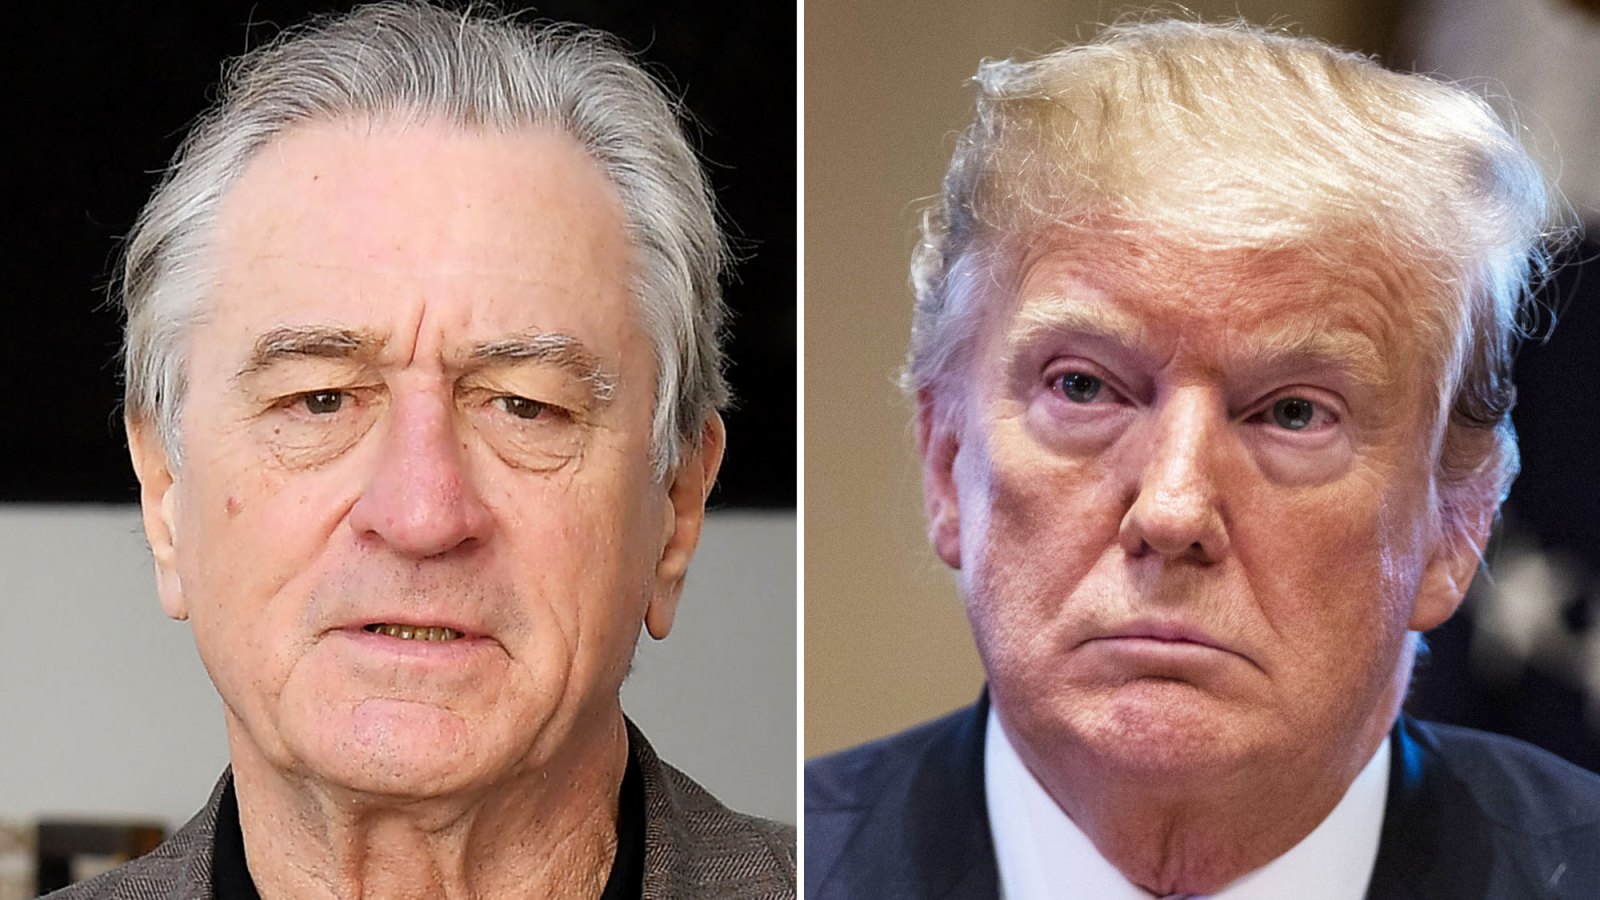 Robert De Niro Declares Donald Trump Is a ‘Real Racist’ and ‘White Supremacist’